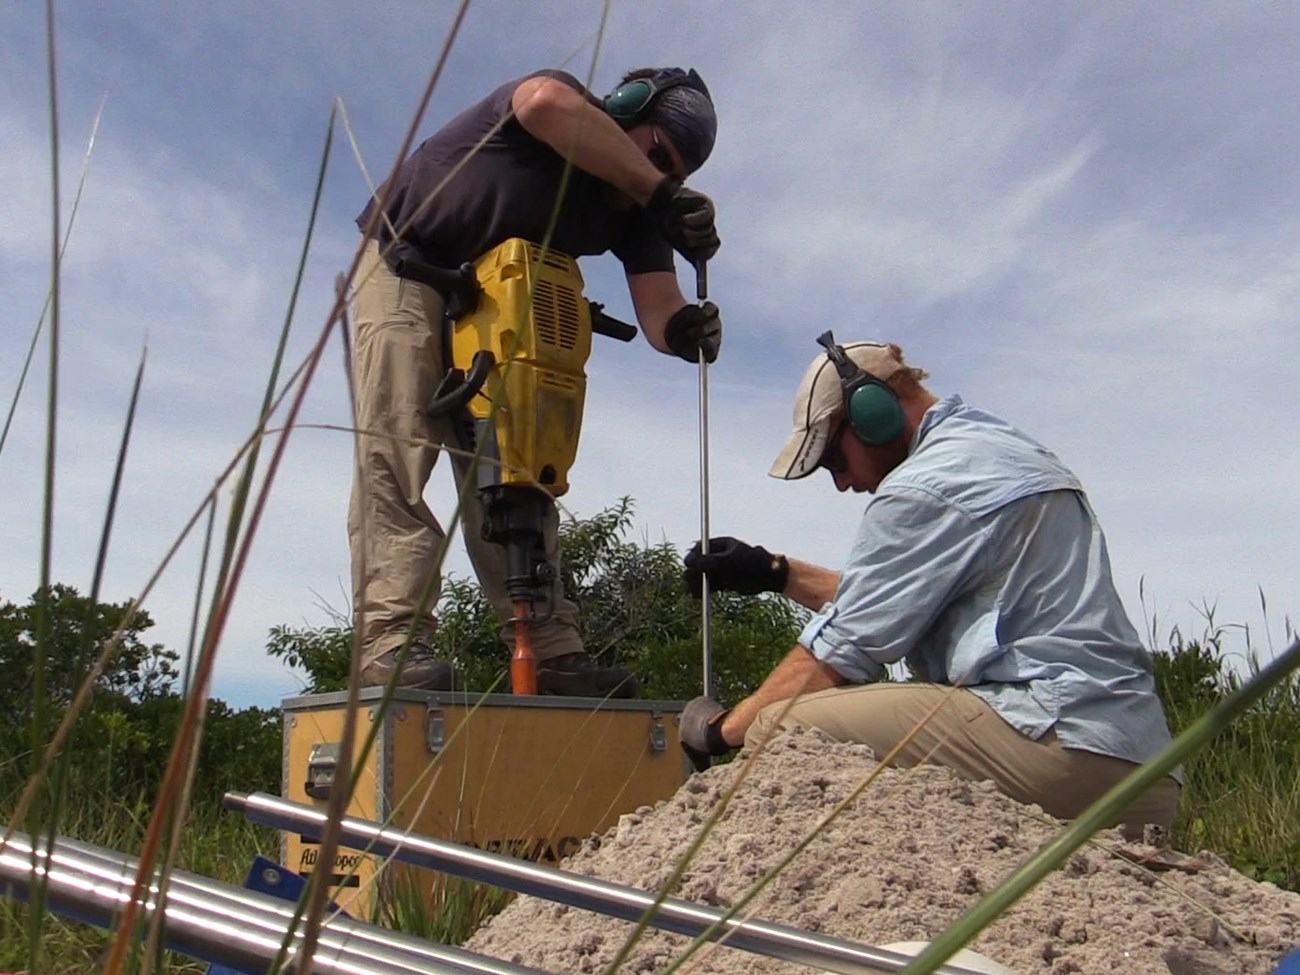 Two men use tools to install elevation markers in sandy soil.